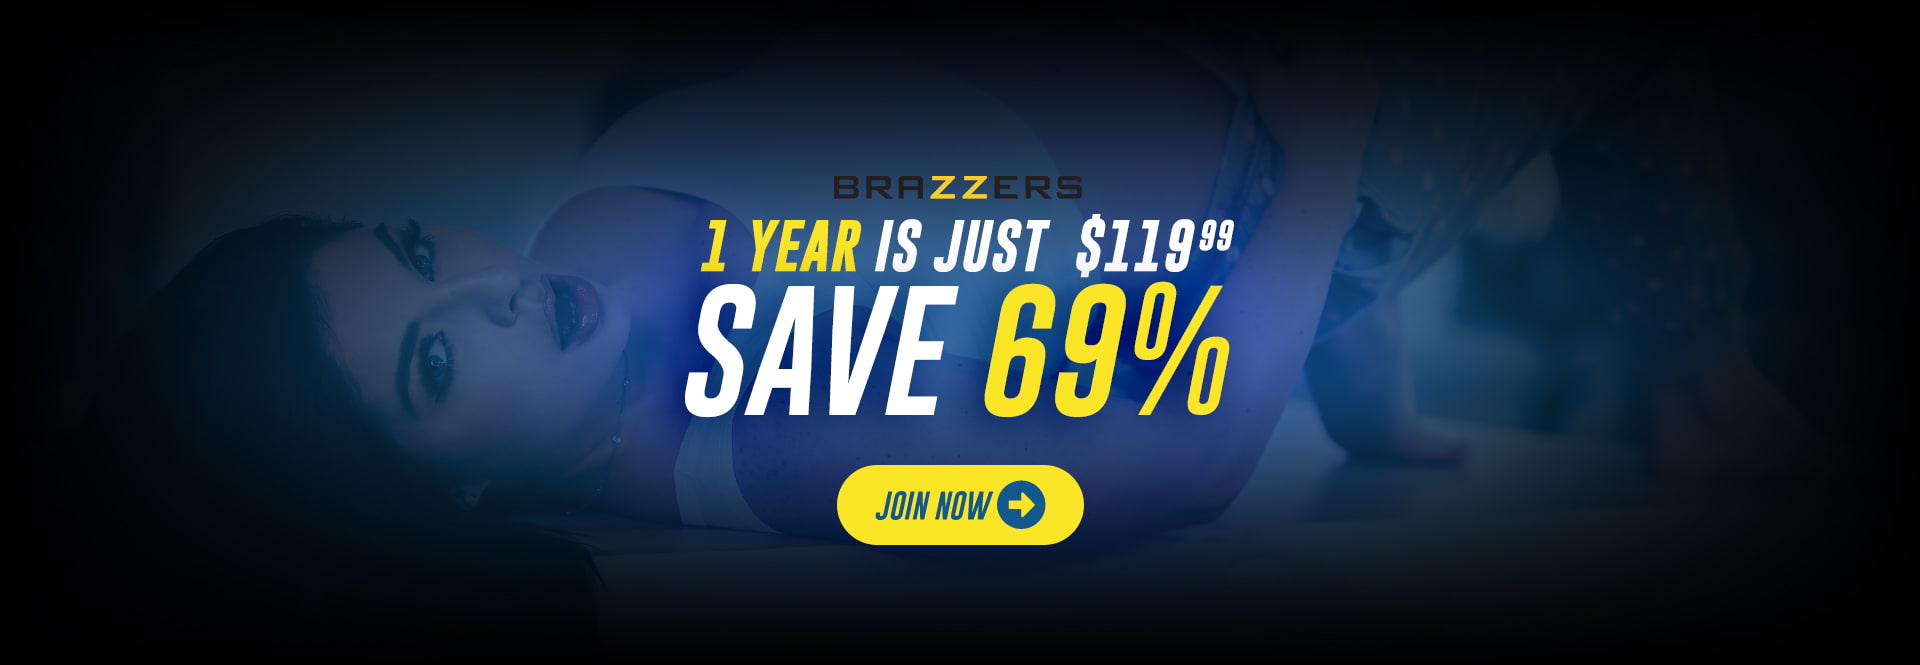 Save Cash Big Now on Brazzers